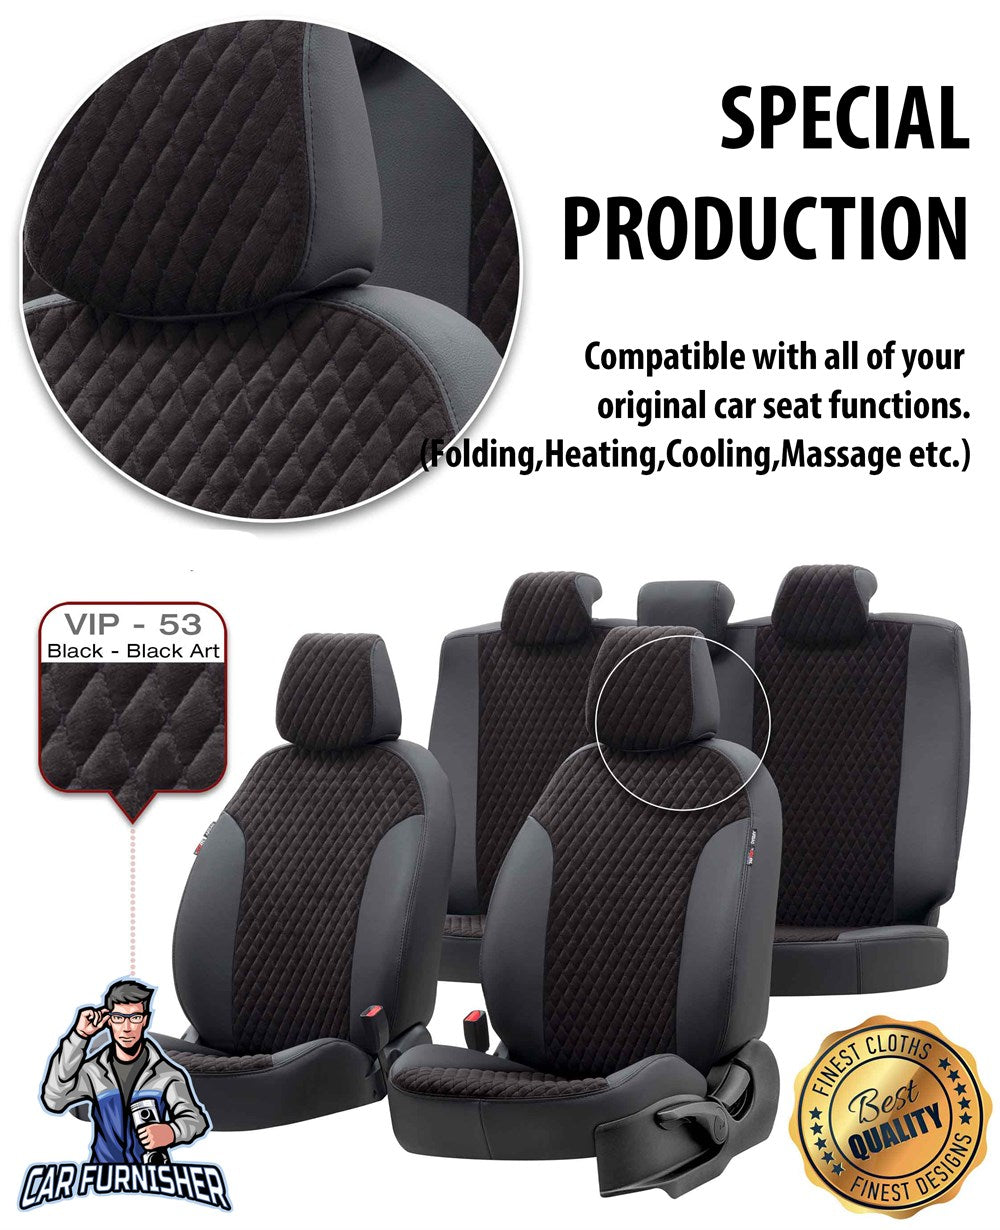 Toyota Corolla Seat Cover Amsterdam Foal Feather Design Black Leather & Foal Feather